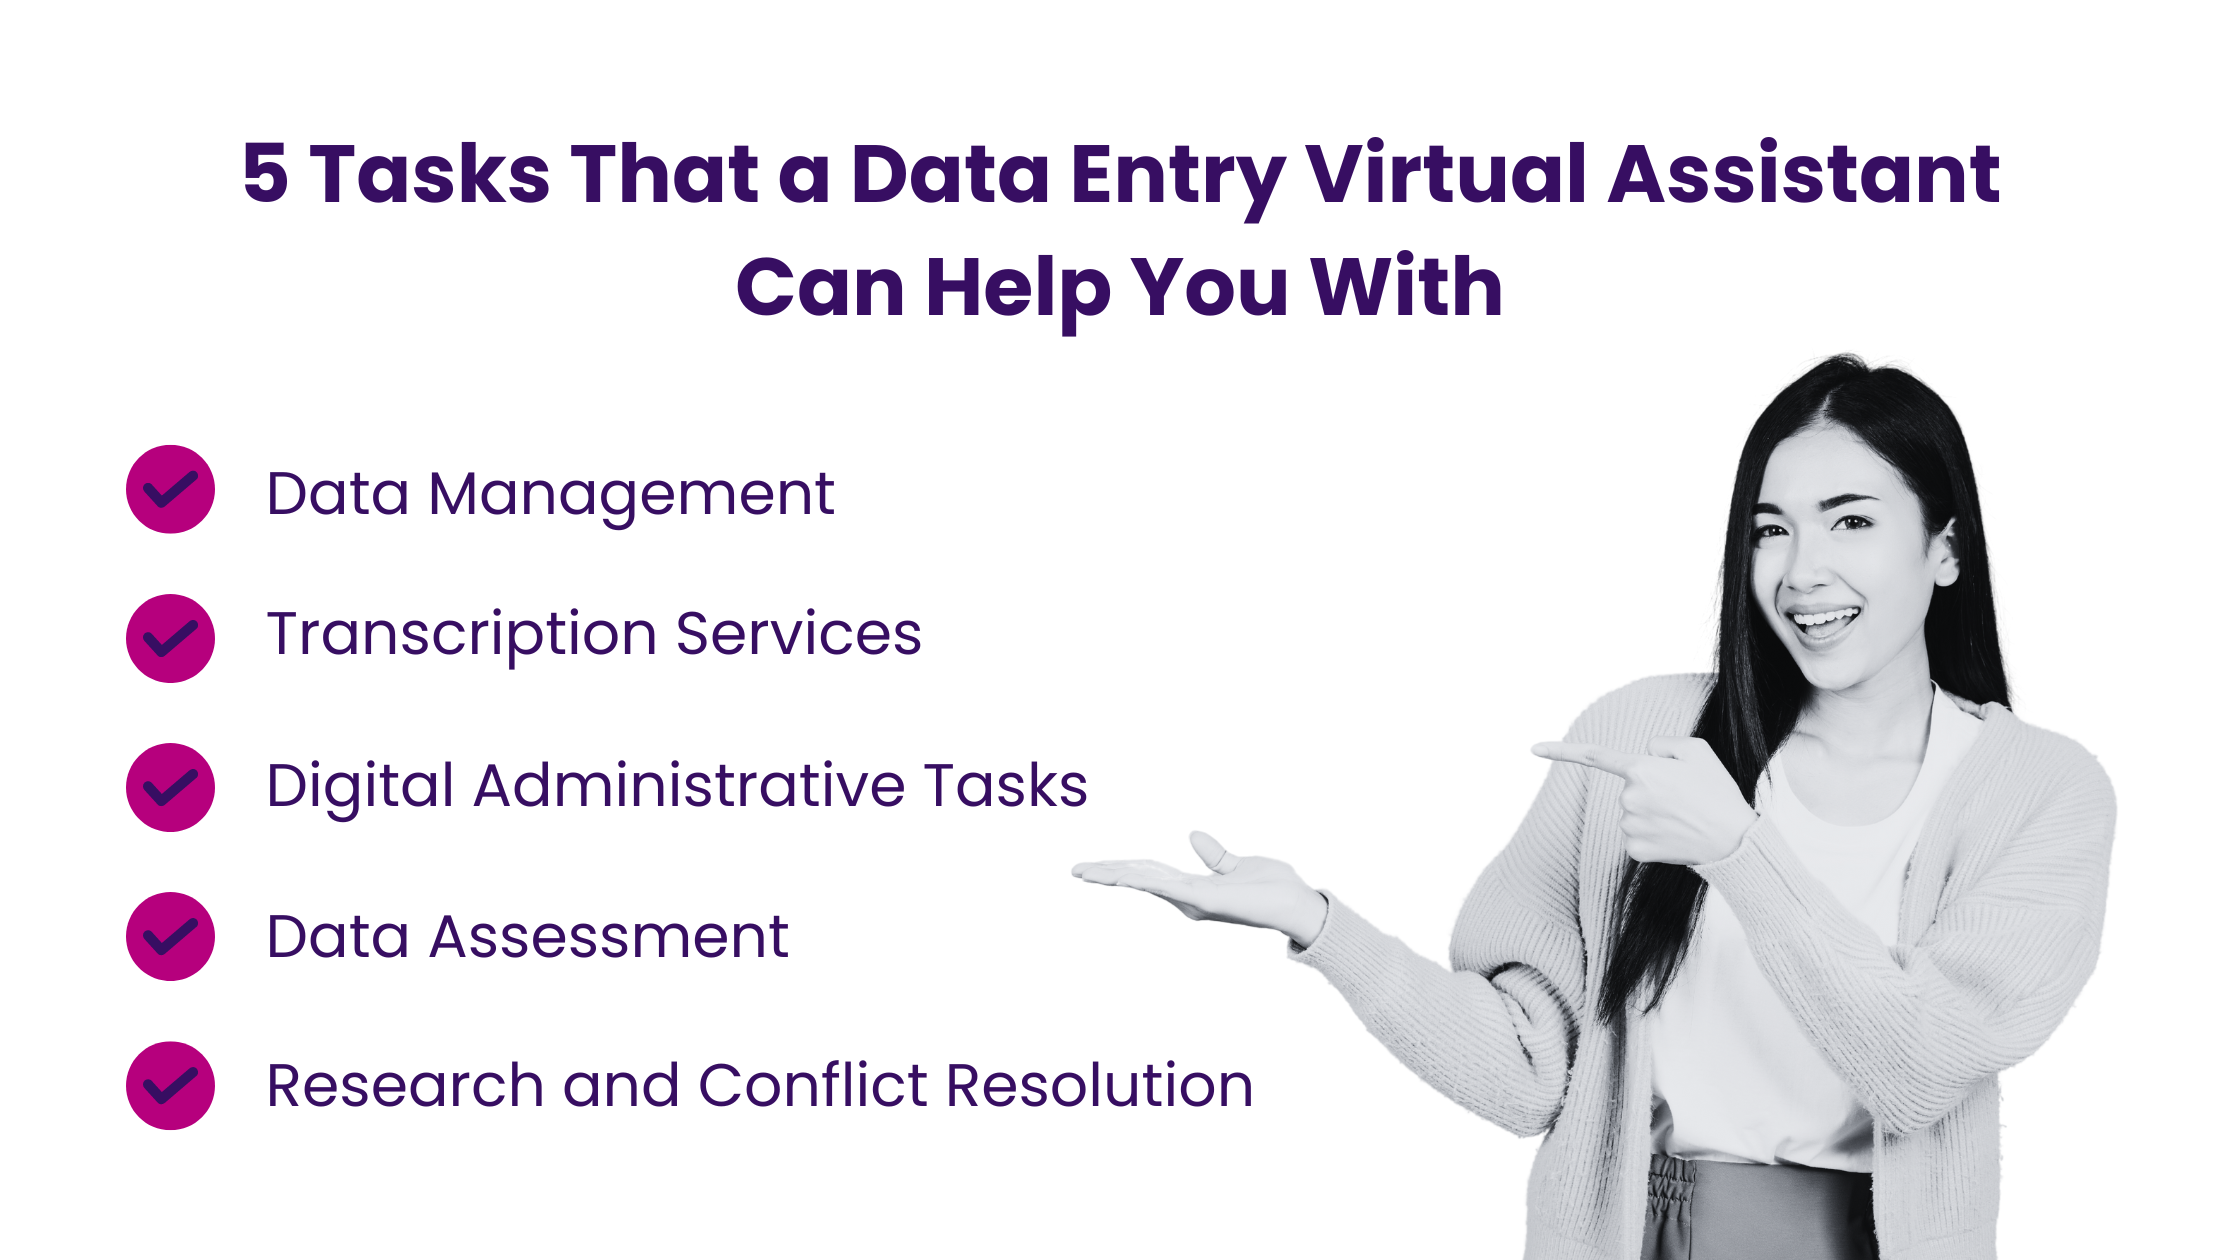 5 Tasks That a Data Entry Virtual Assistant Can Help You With